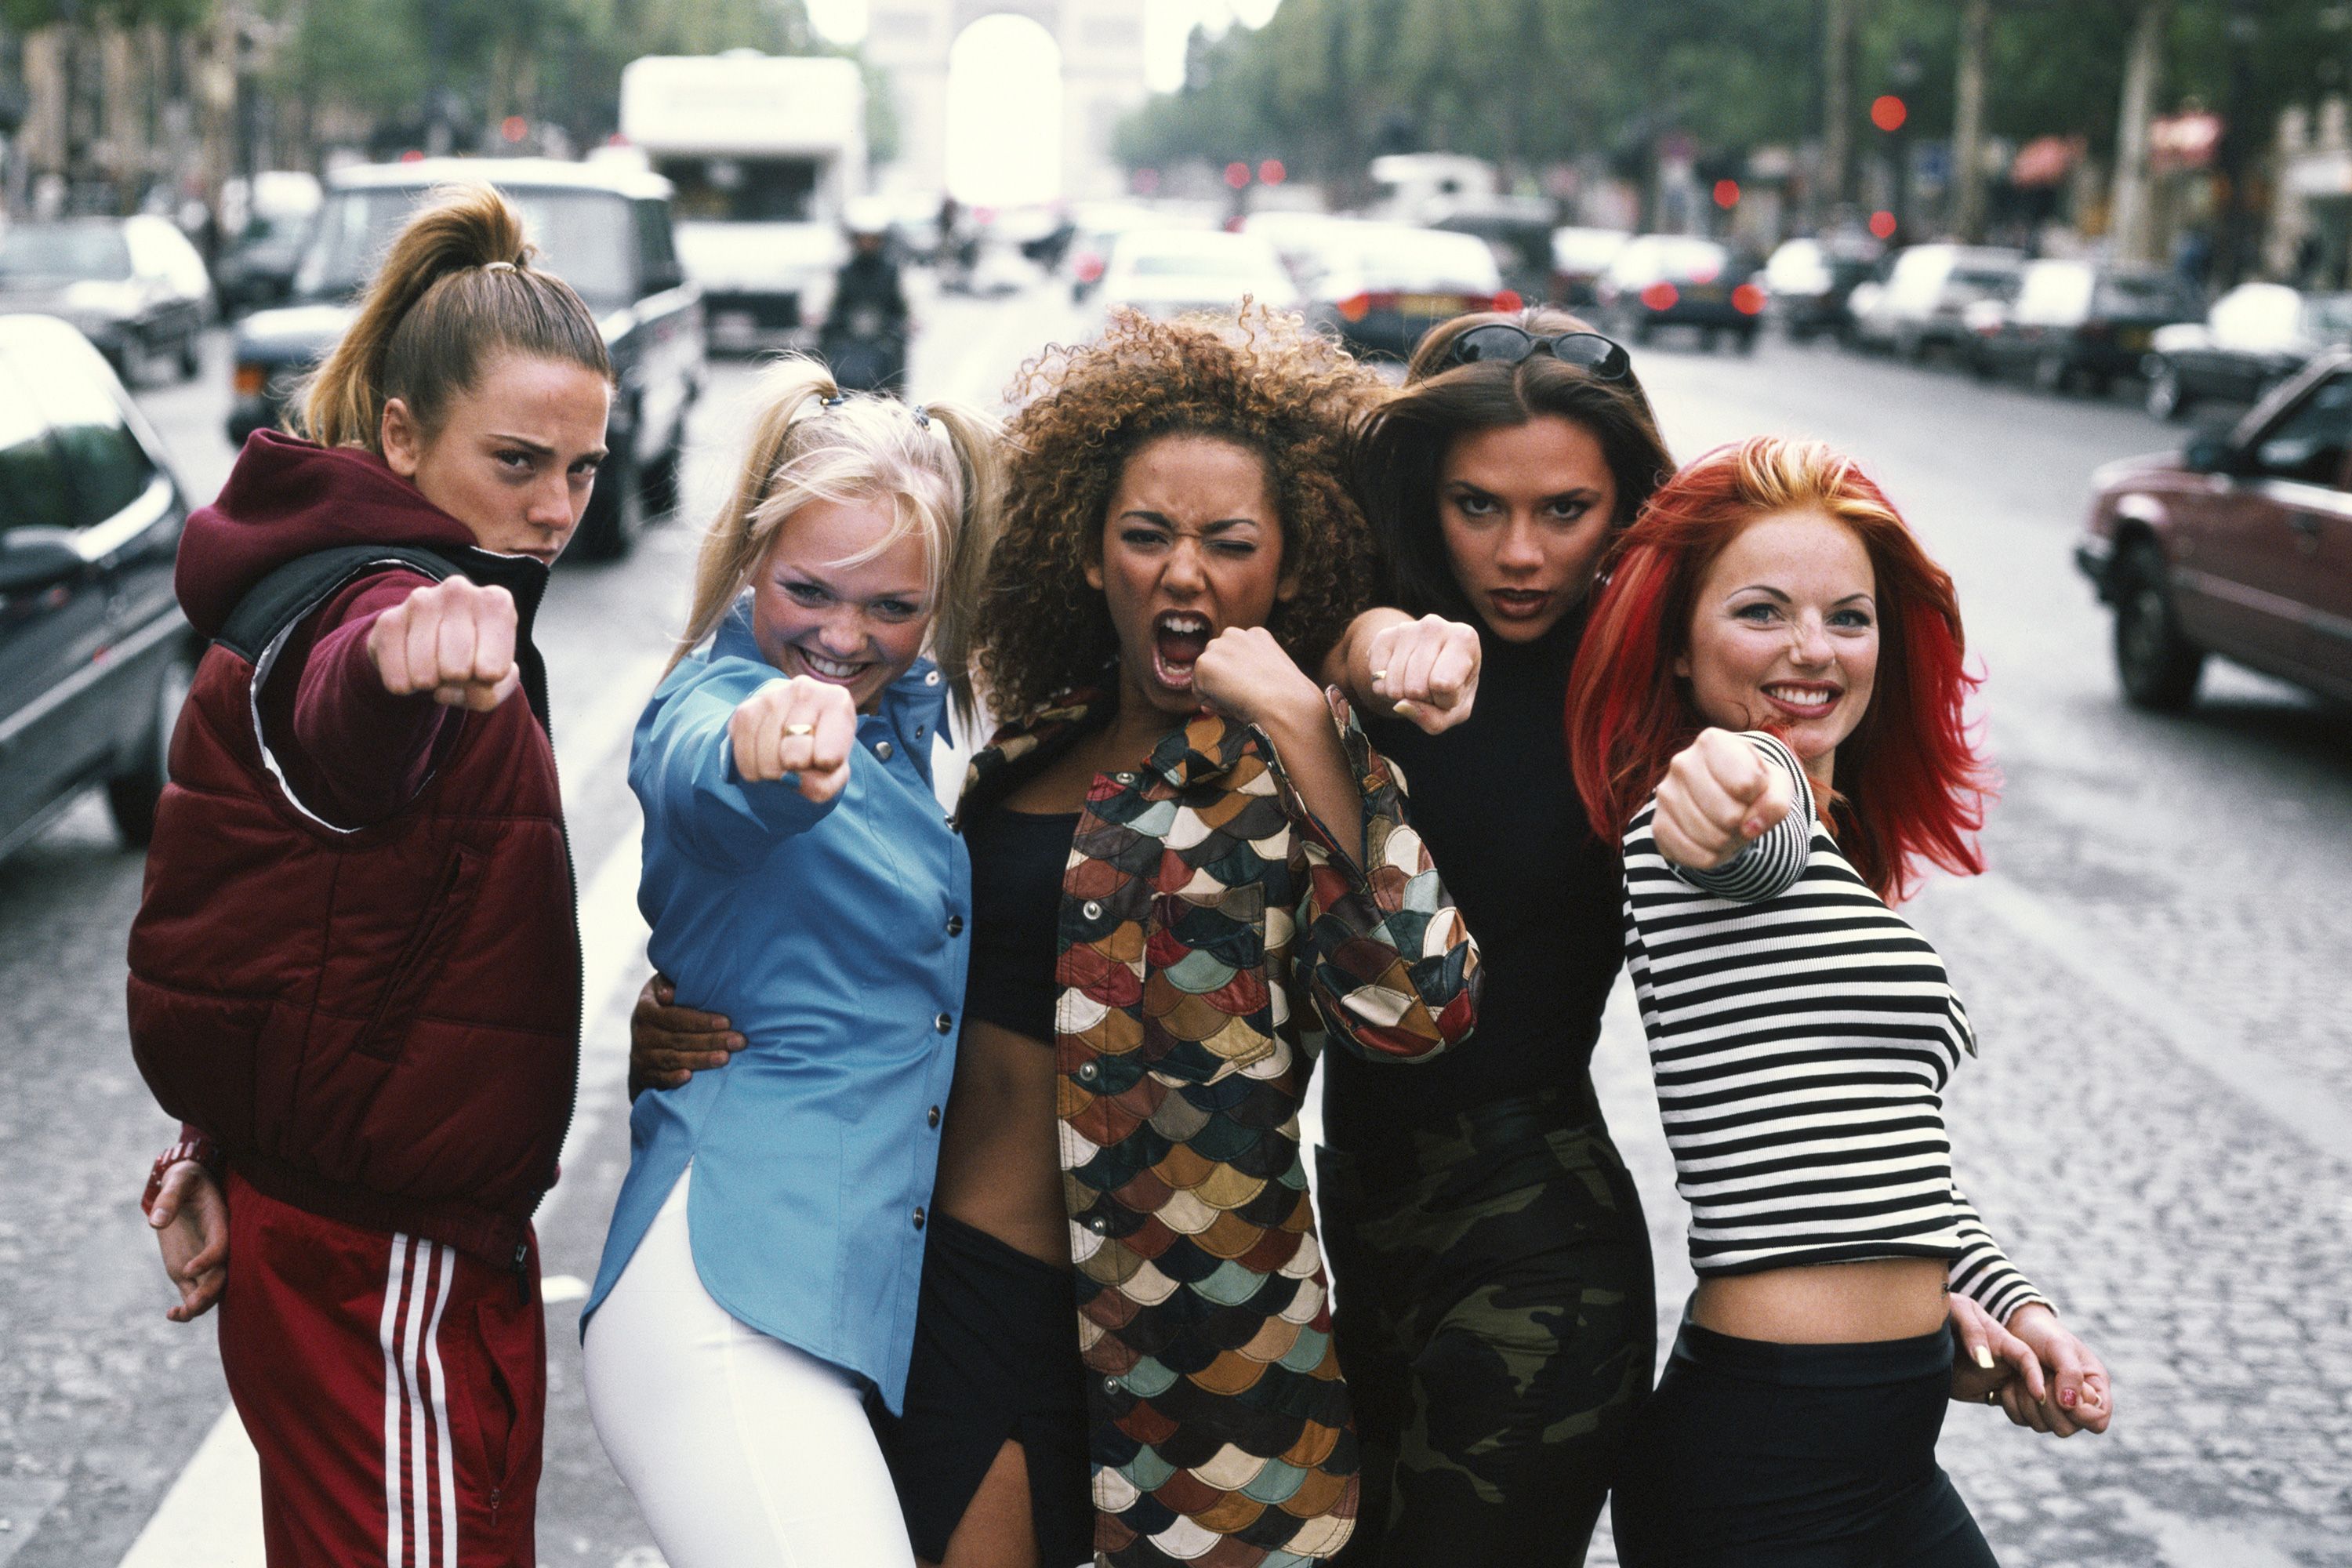 7 fashion trends started by the Spice Girls